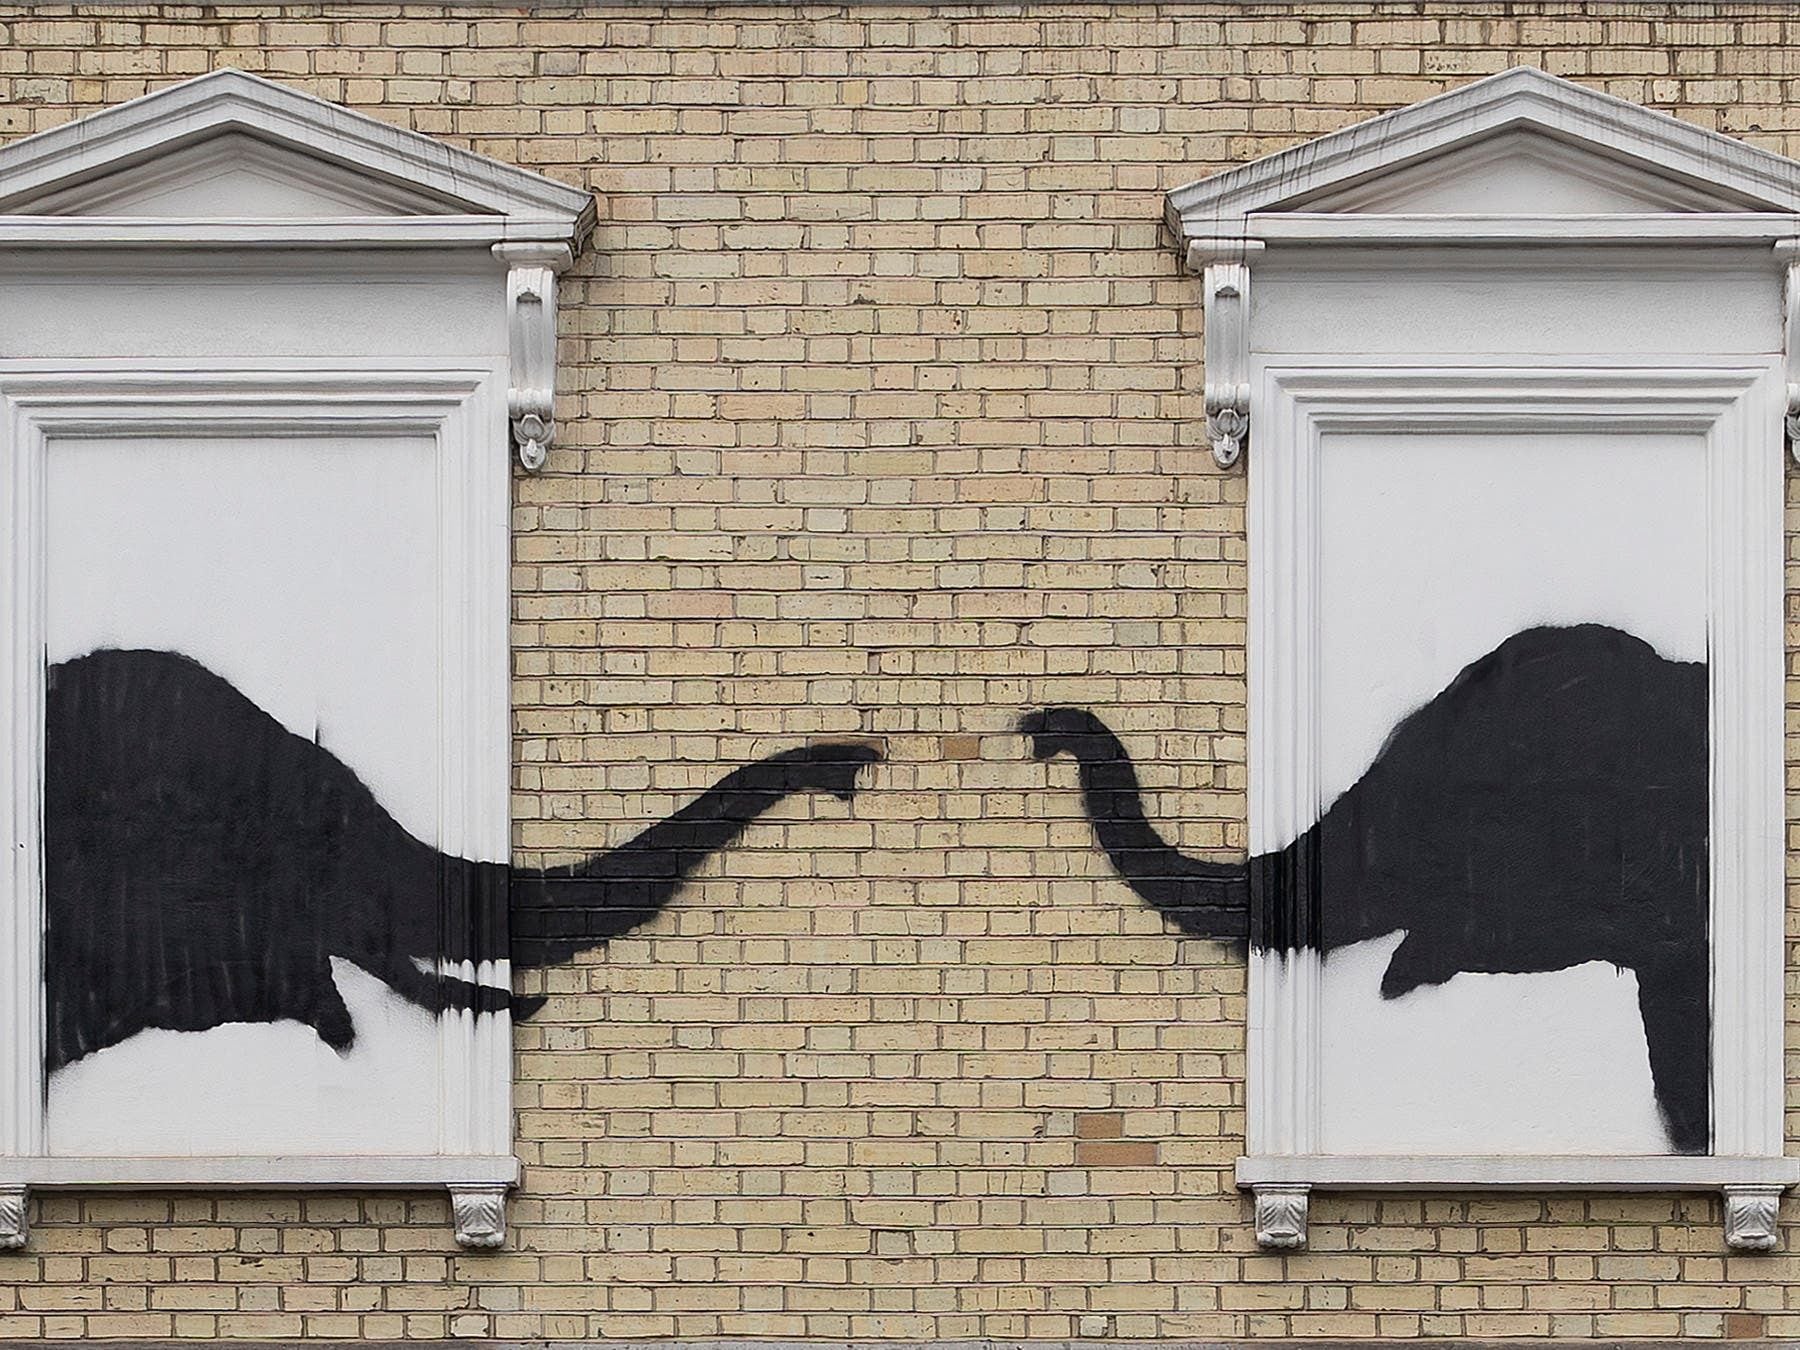 Banksy adds to animal artwork collection in London with new elephant design